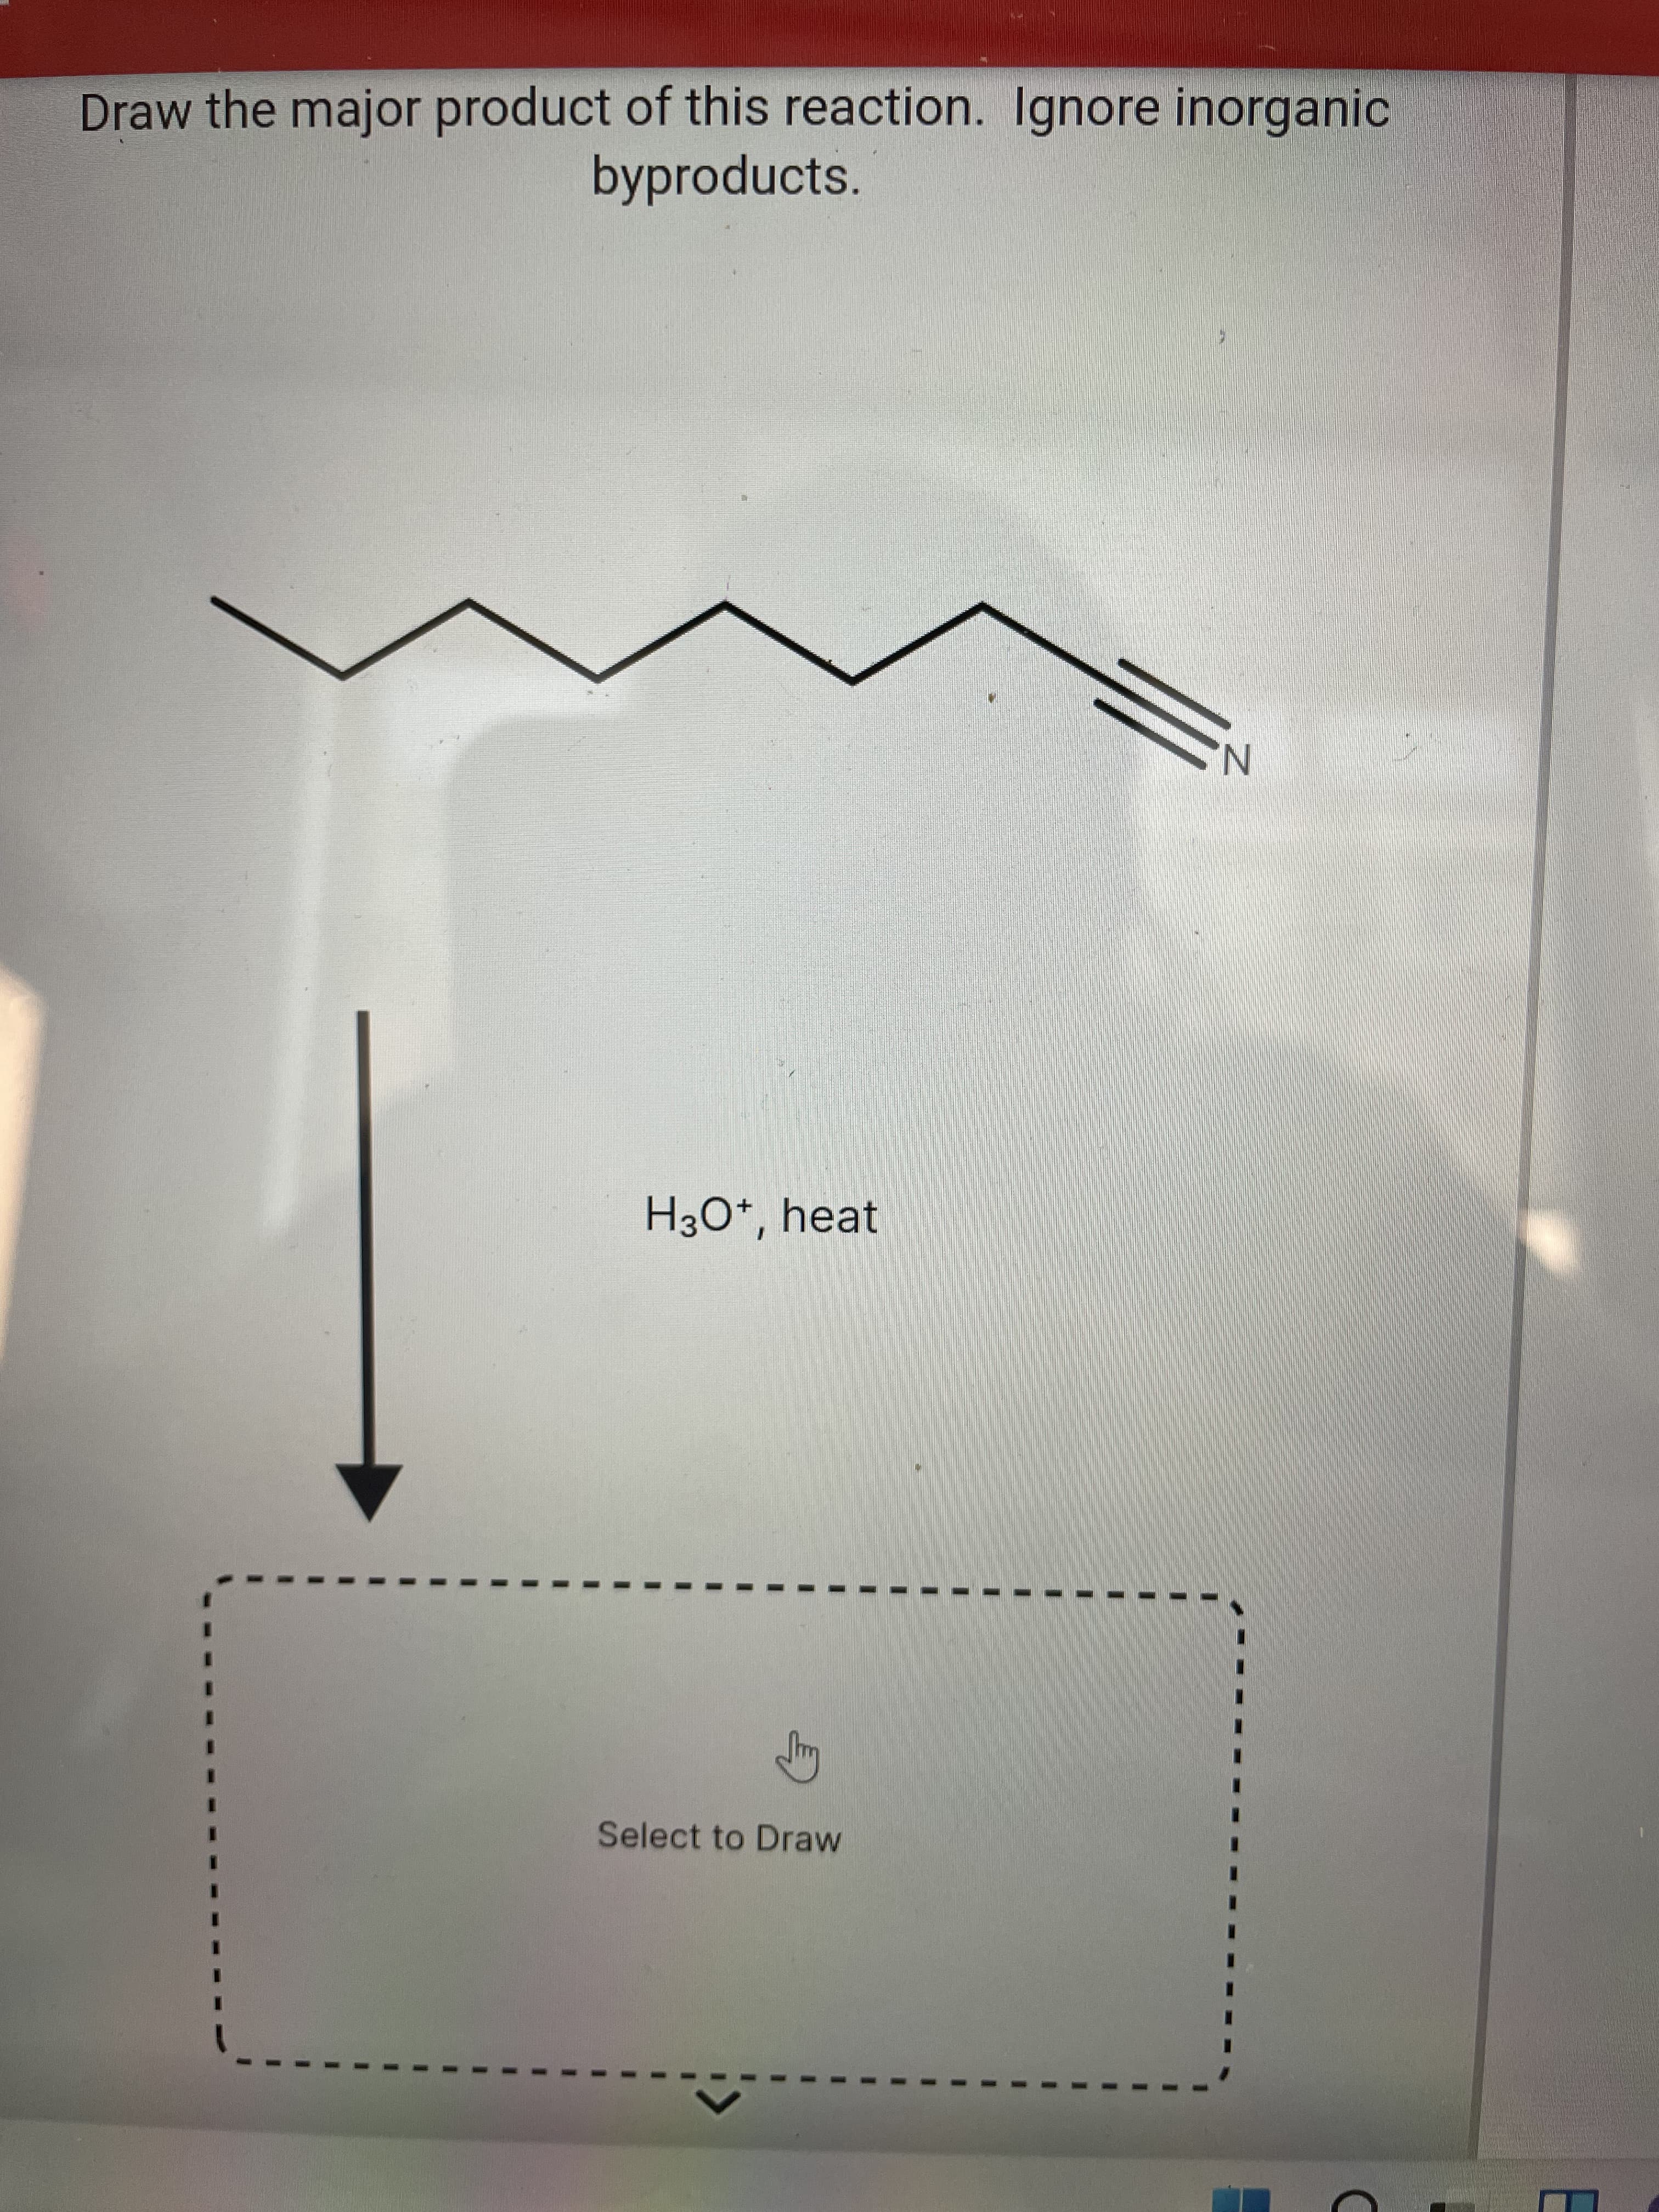 Draw the major product of this reaction. Ignore inorganic
byproducts.
N,
H3O*, heat
Select to Draw
